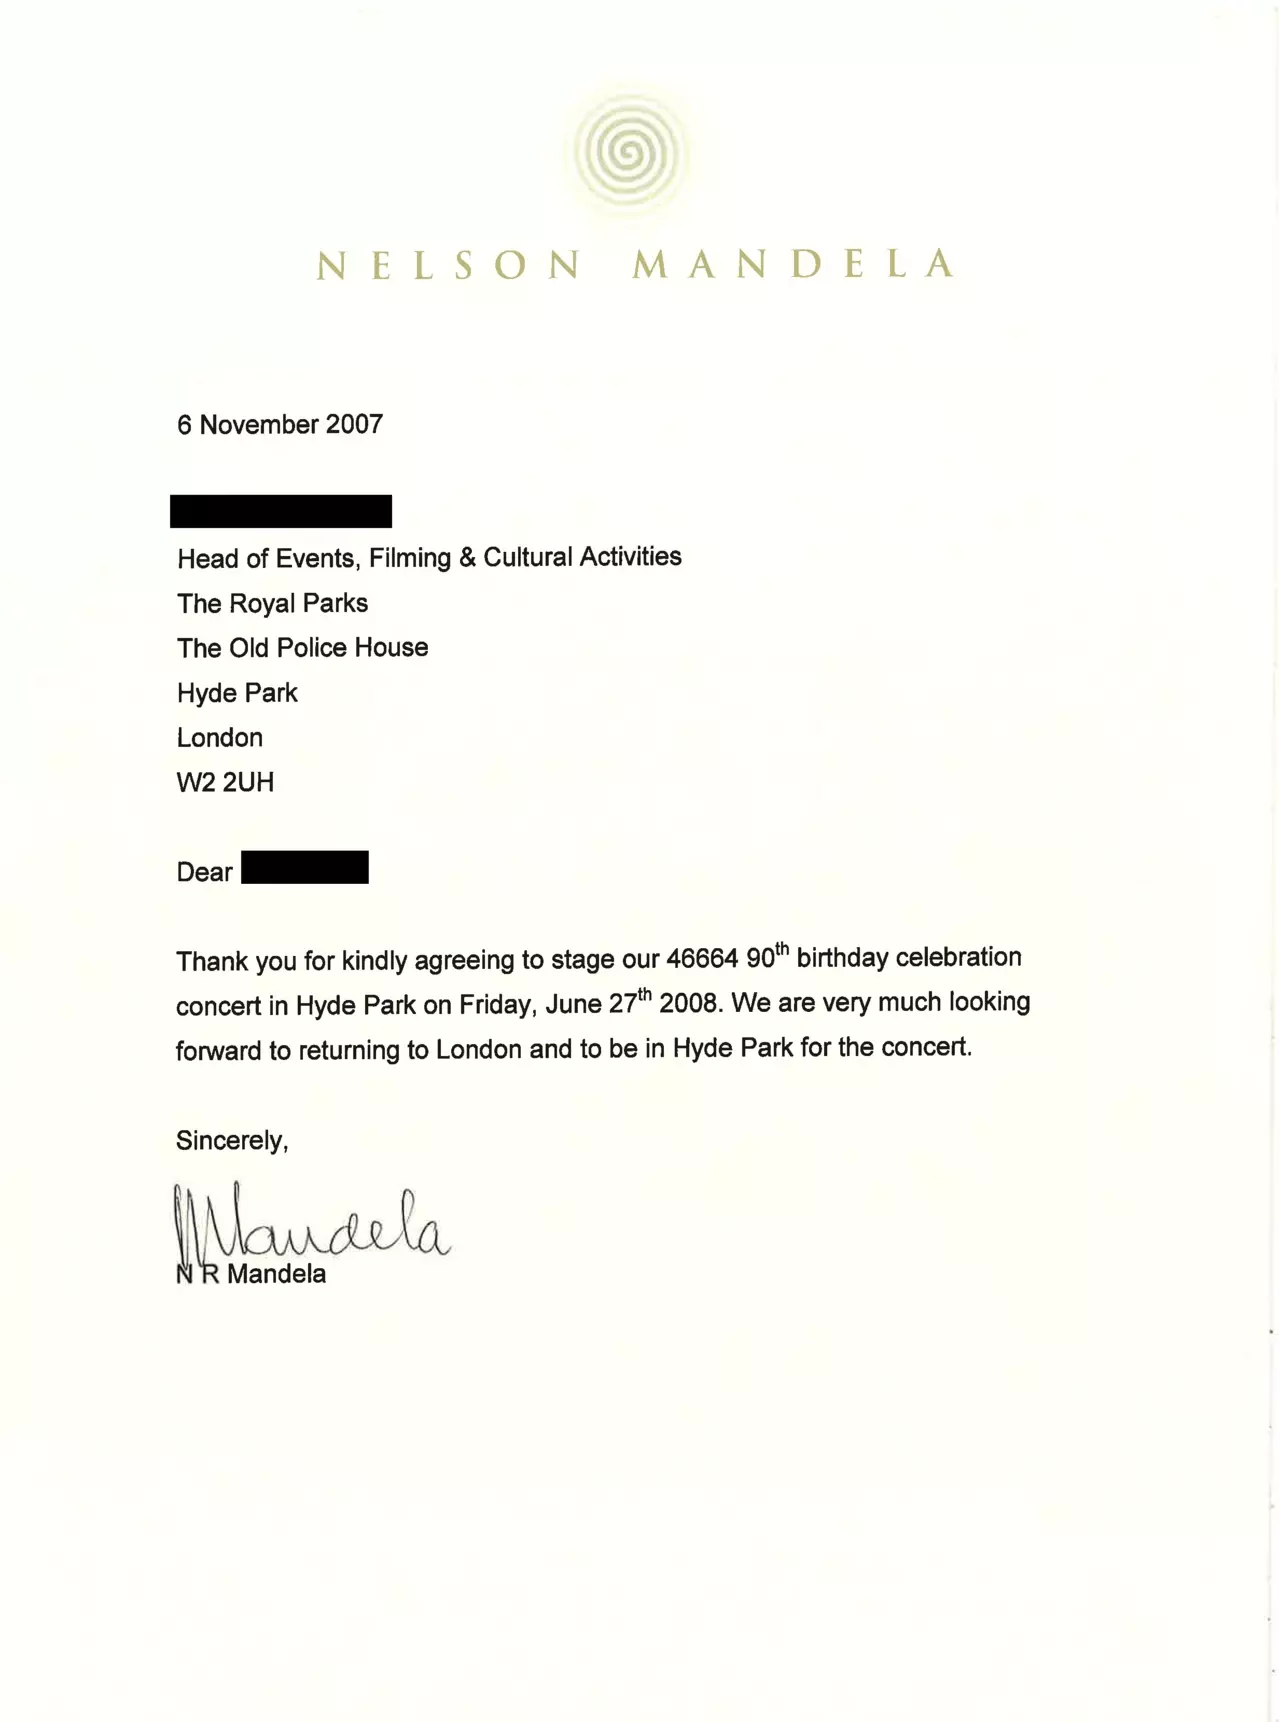 Letter from Nelson Mandela to The Royal Parks in 2007, accepting the invitation to attend the Hyde Park concert © Nelson Mandela Foundation / 46664